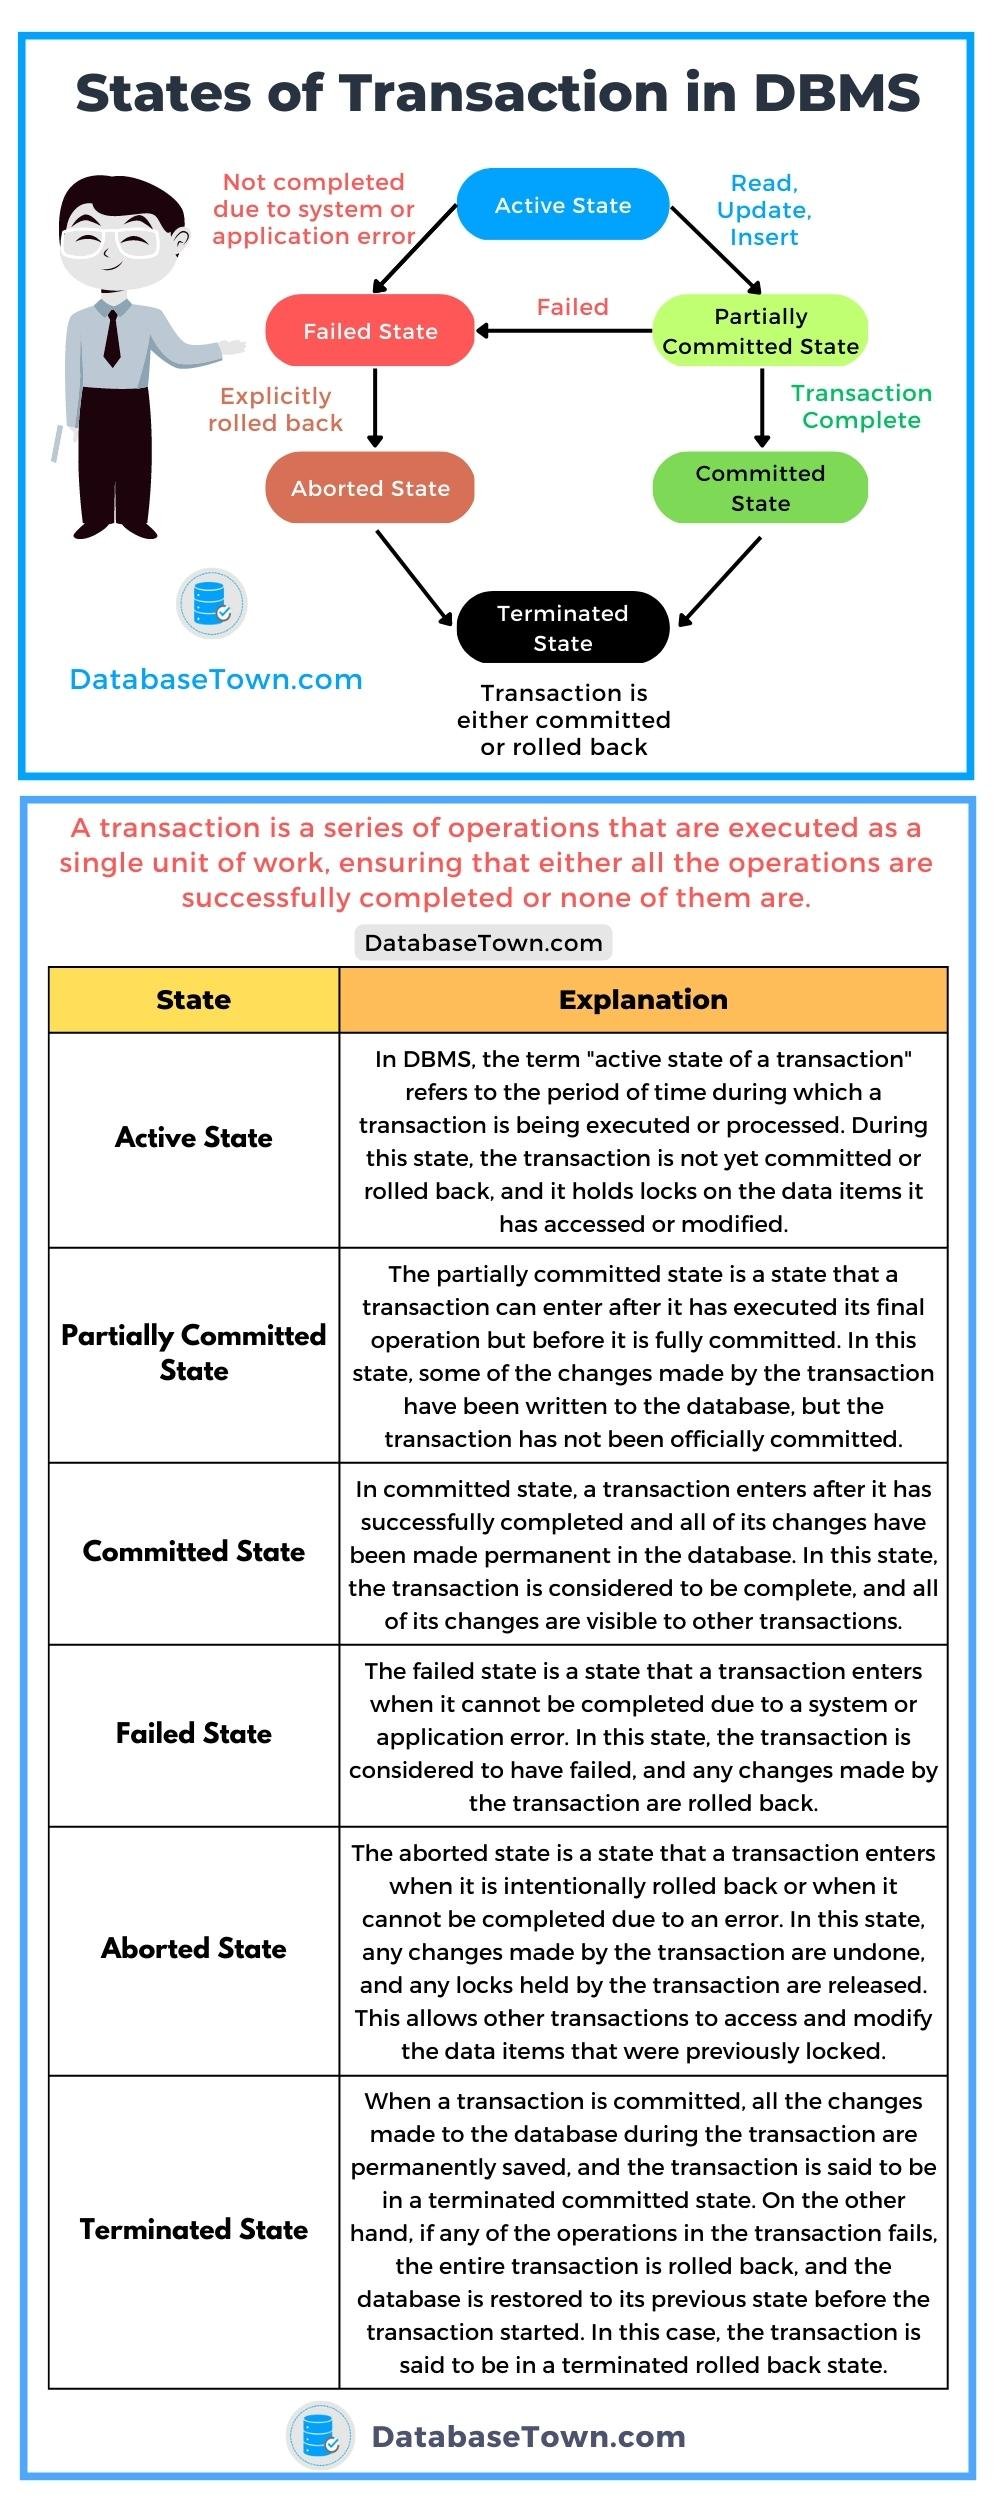 6 States of Transaction in DBMS (active state, partially committed state, committed state, aborted state, failed state, terminated state)